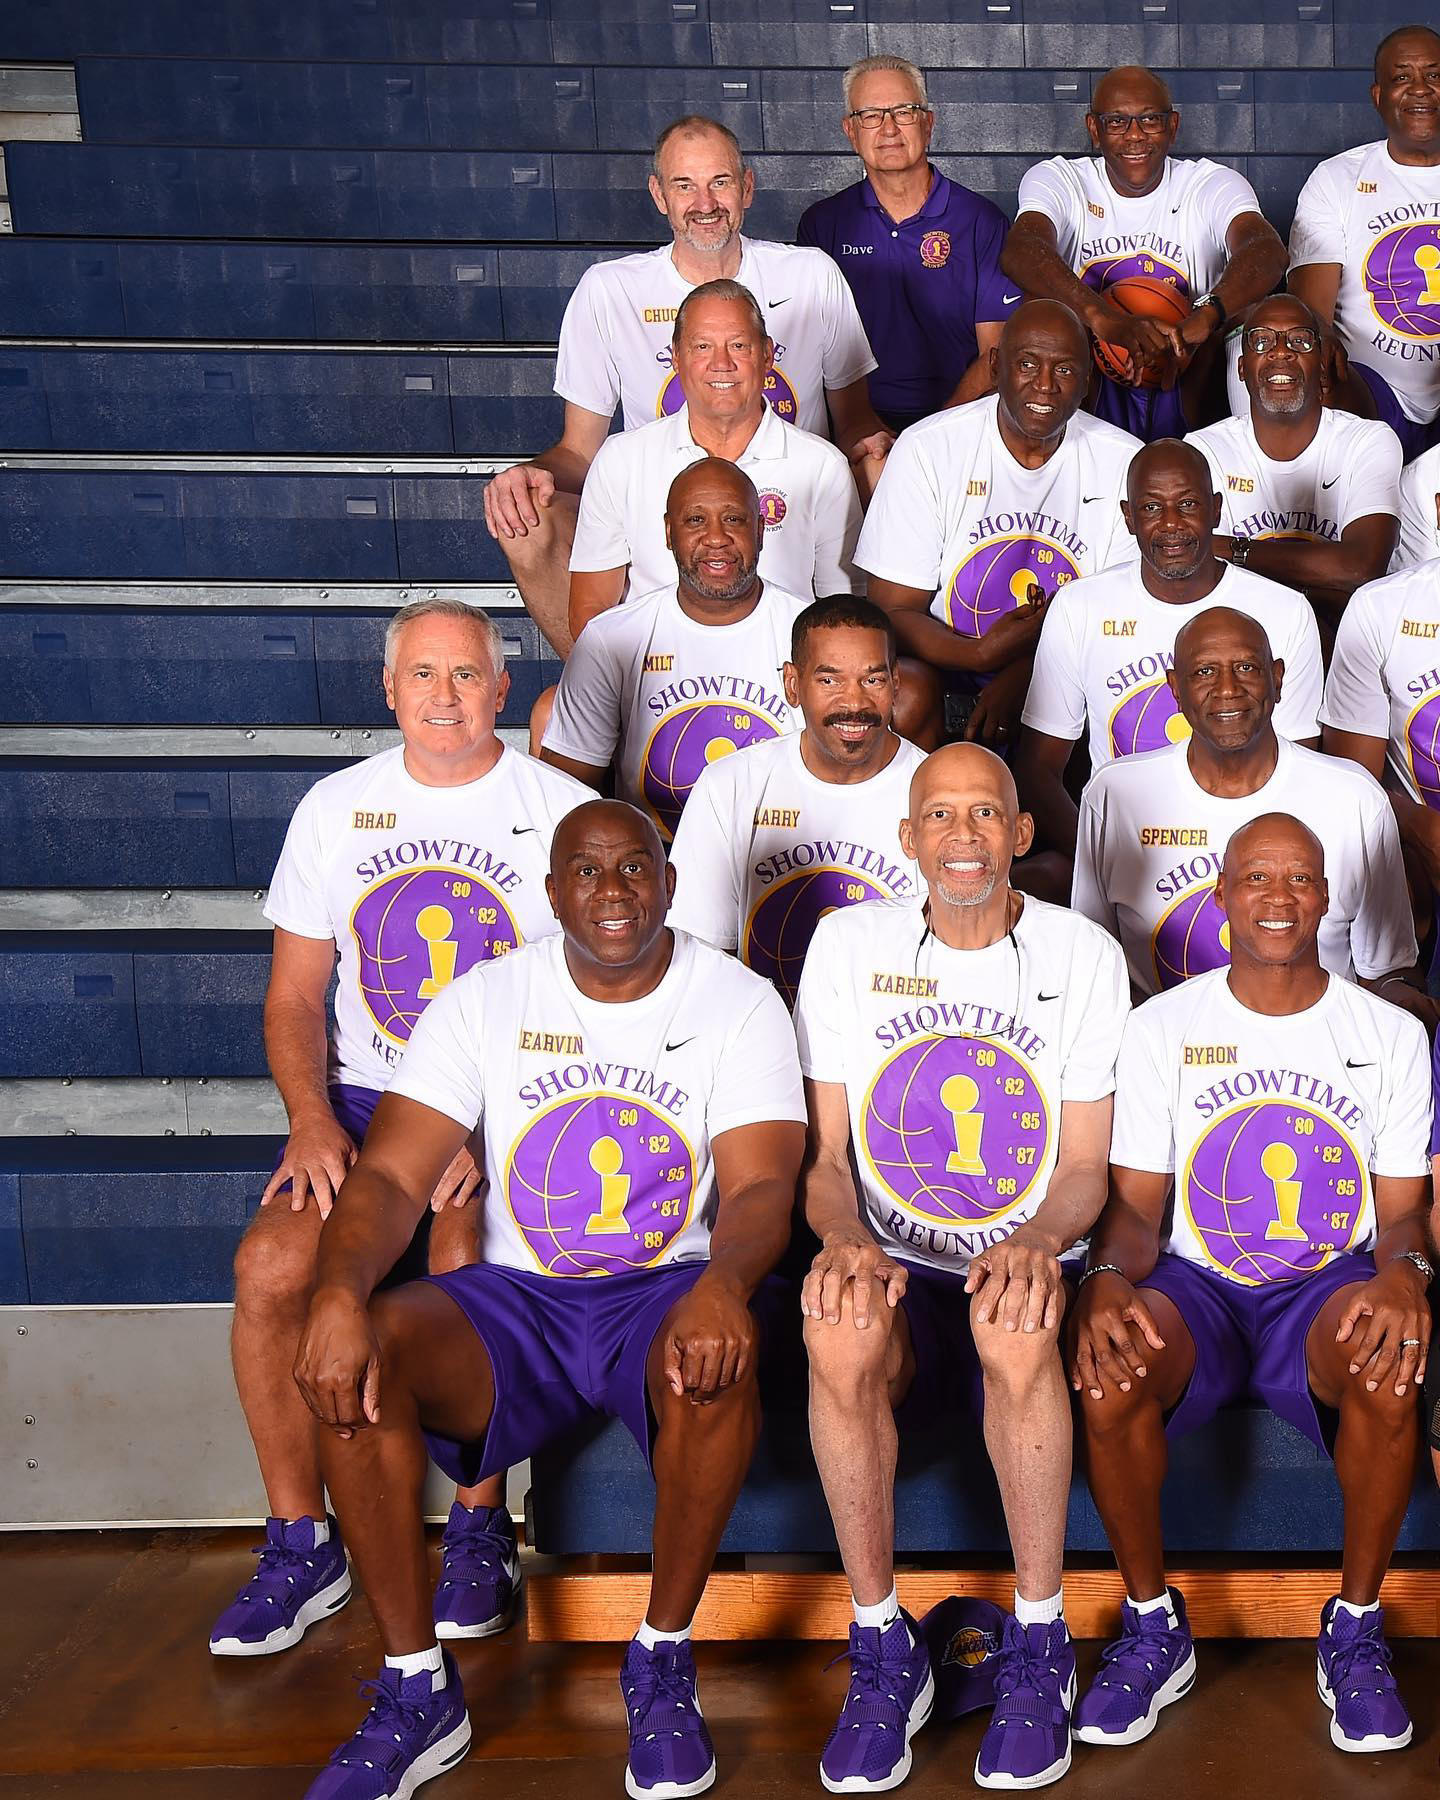 The “SHOWTIME” #lakers got back together in Maui